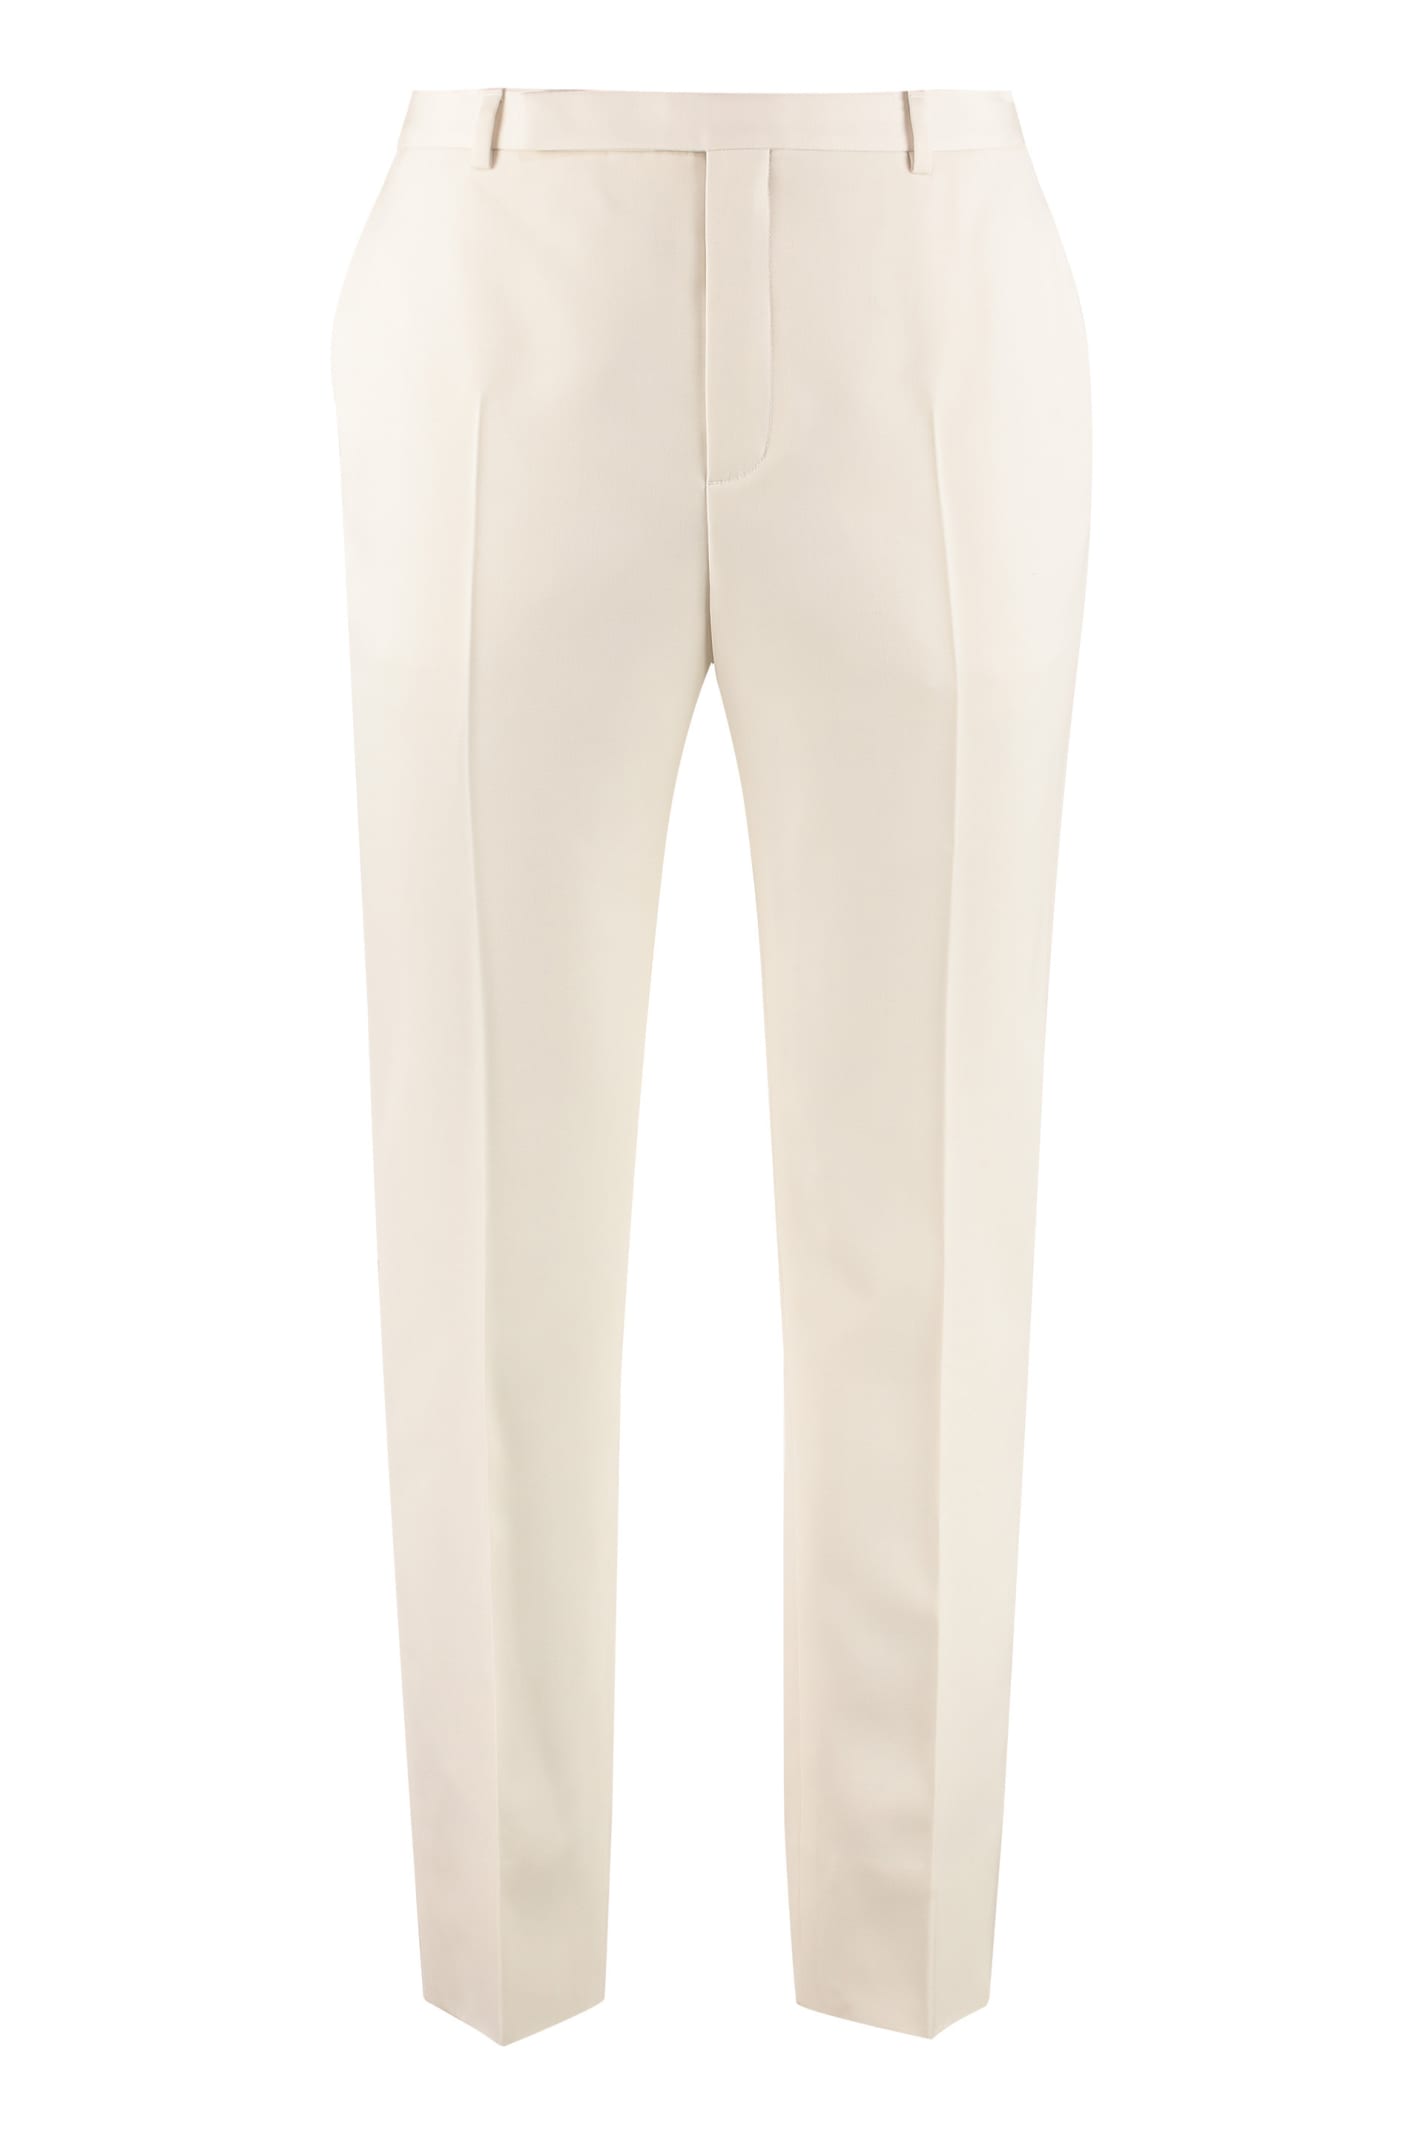 saint laurent wool tailored trousers